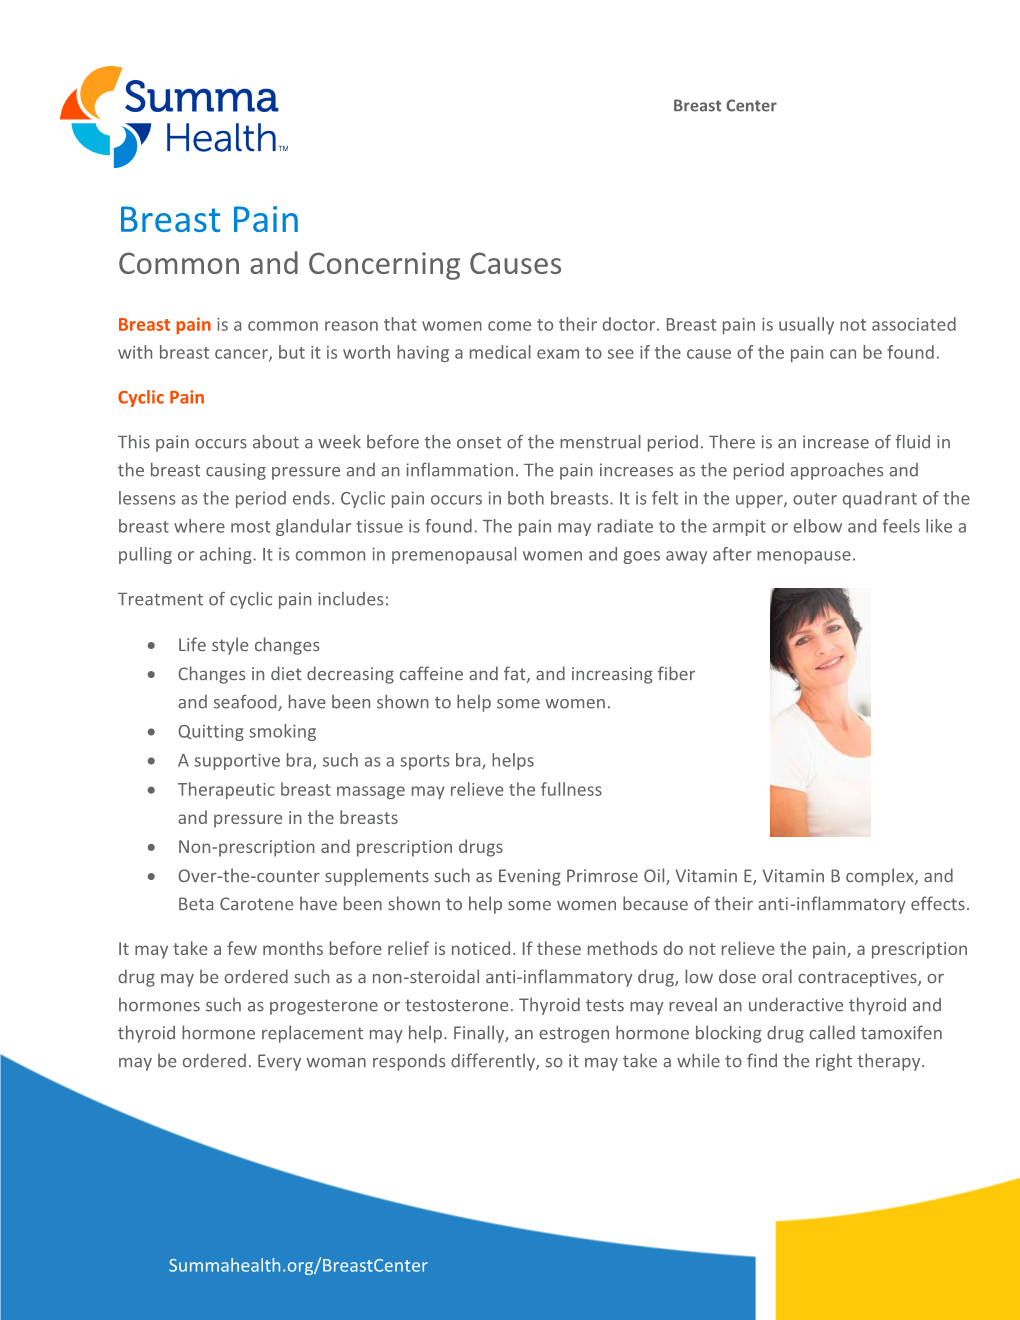 Breast Pain Common and Concerning Causes